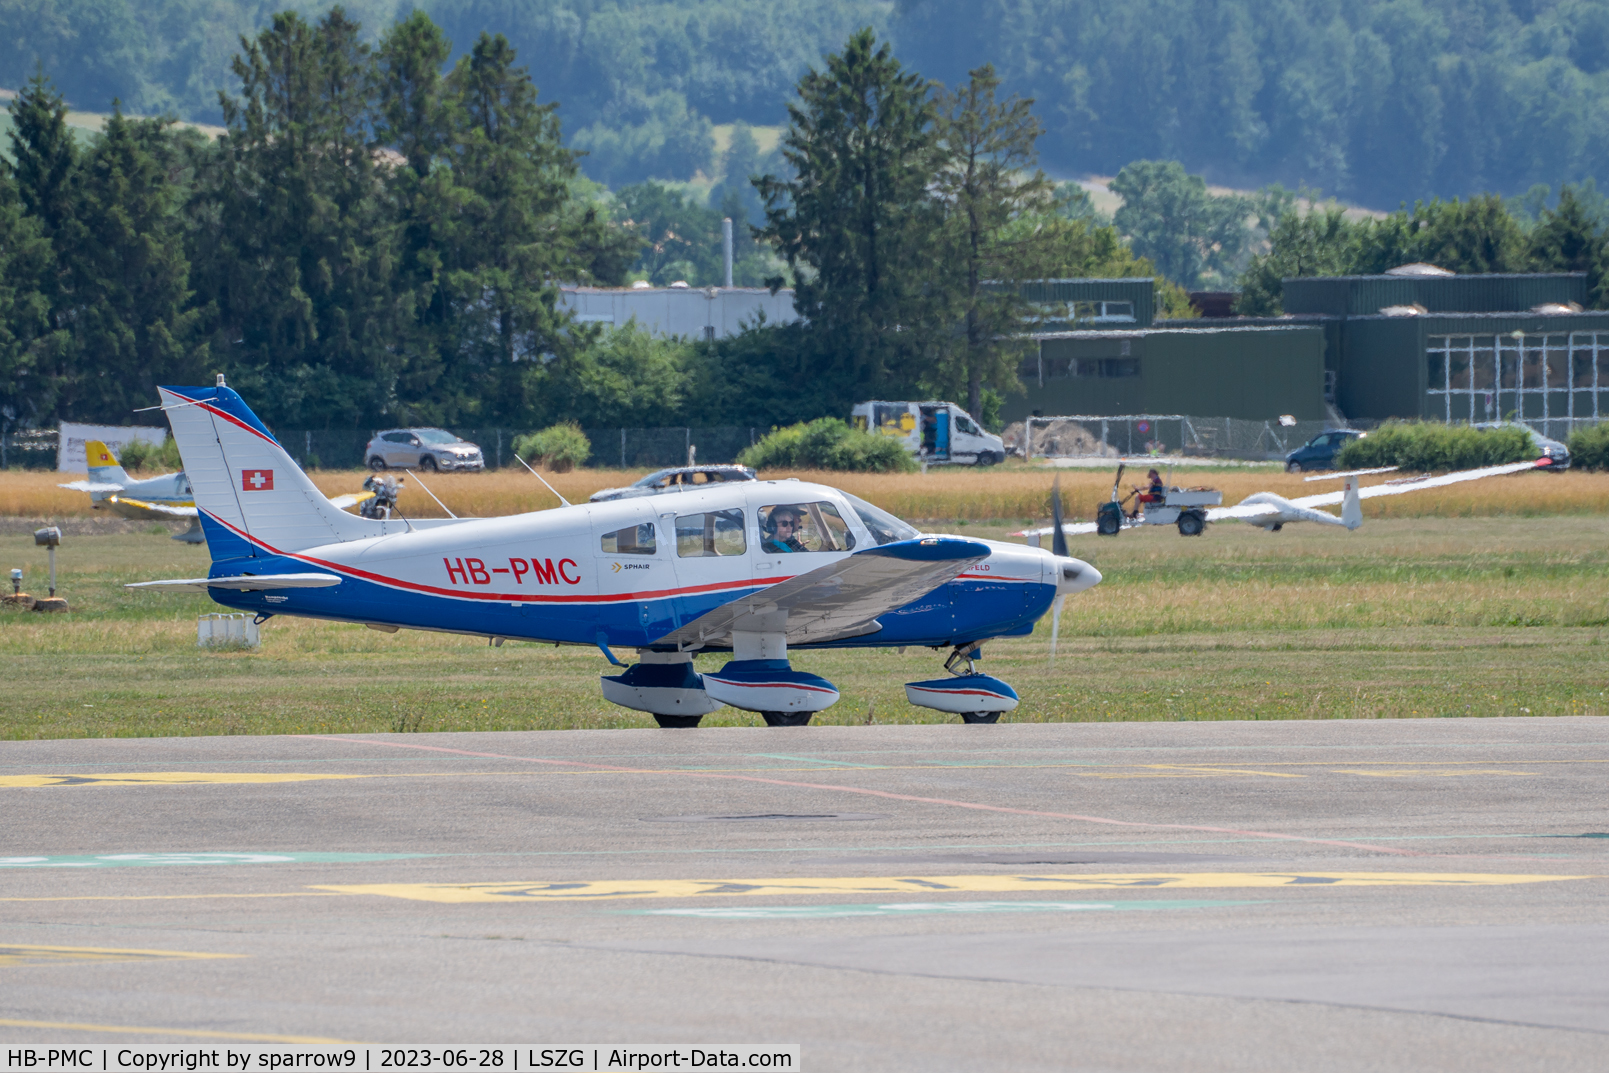 HB-PMC, 1989 Piper PA-28-161 C/N 2816077, With a new paint-scheme. HB-registered since 1989-02-15.